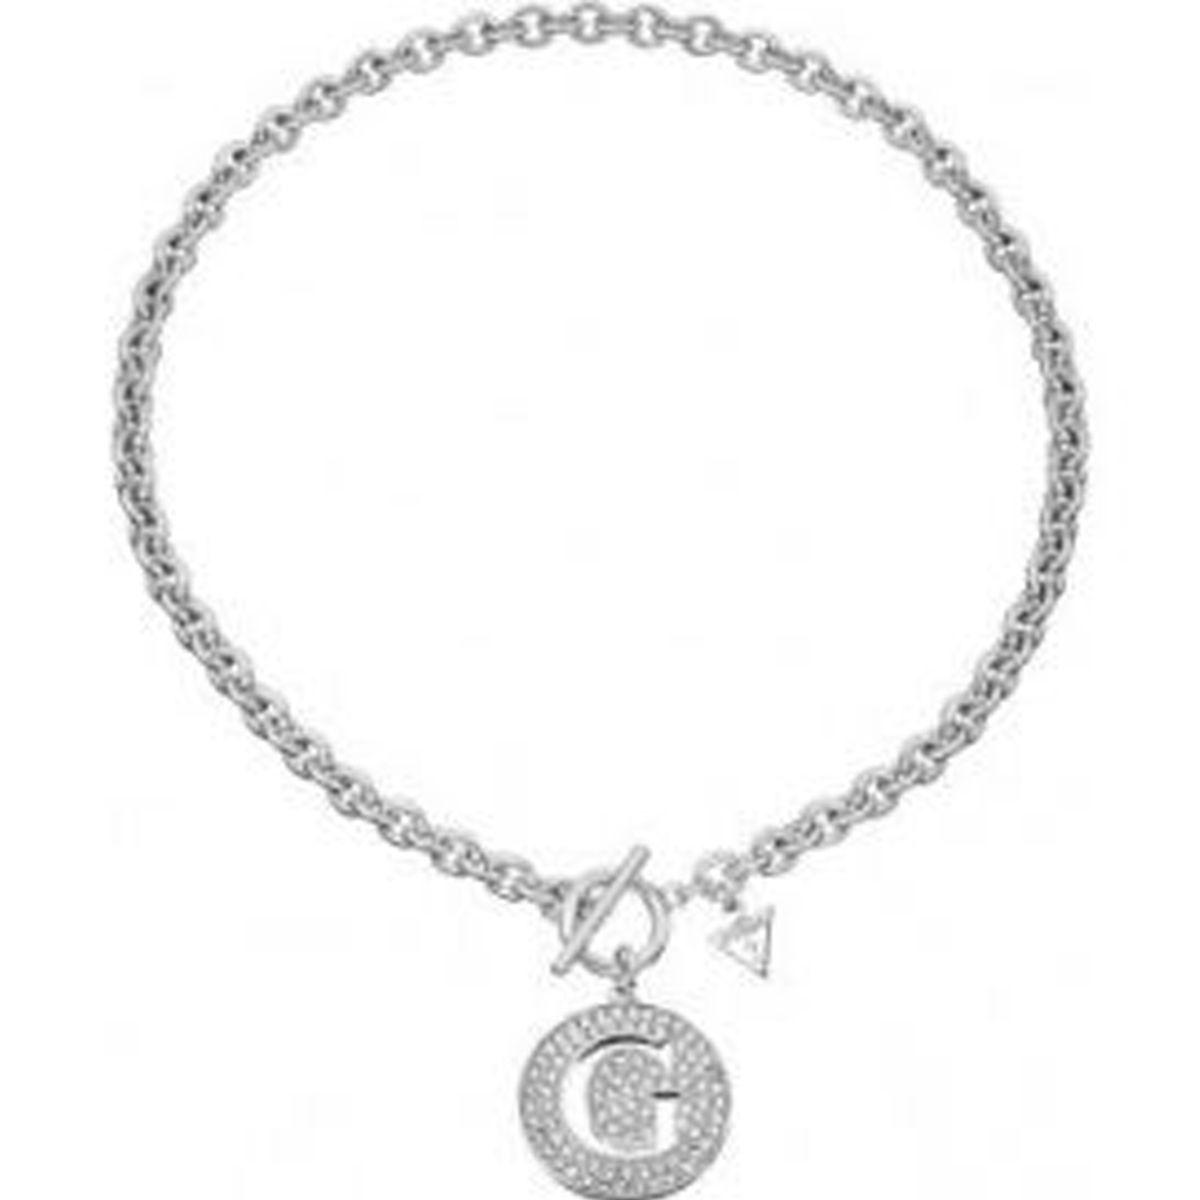 Guess G Logo - Ysora - Jewel, Guess G Girl necklace in silvery metal with G logo ...